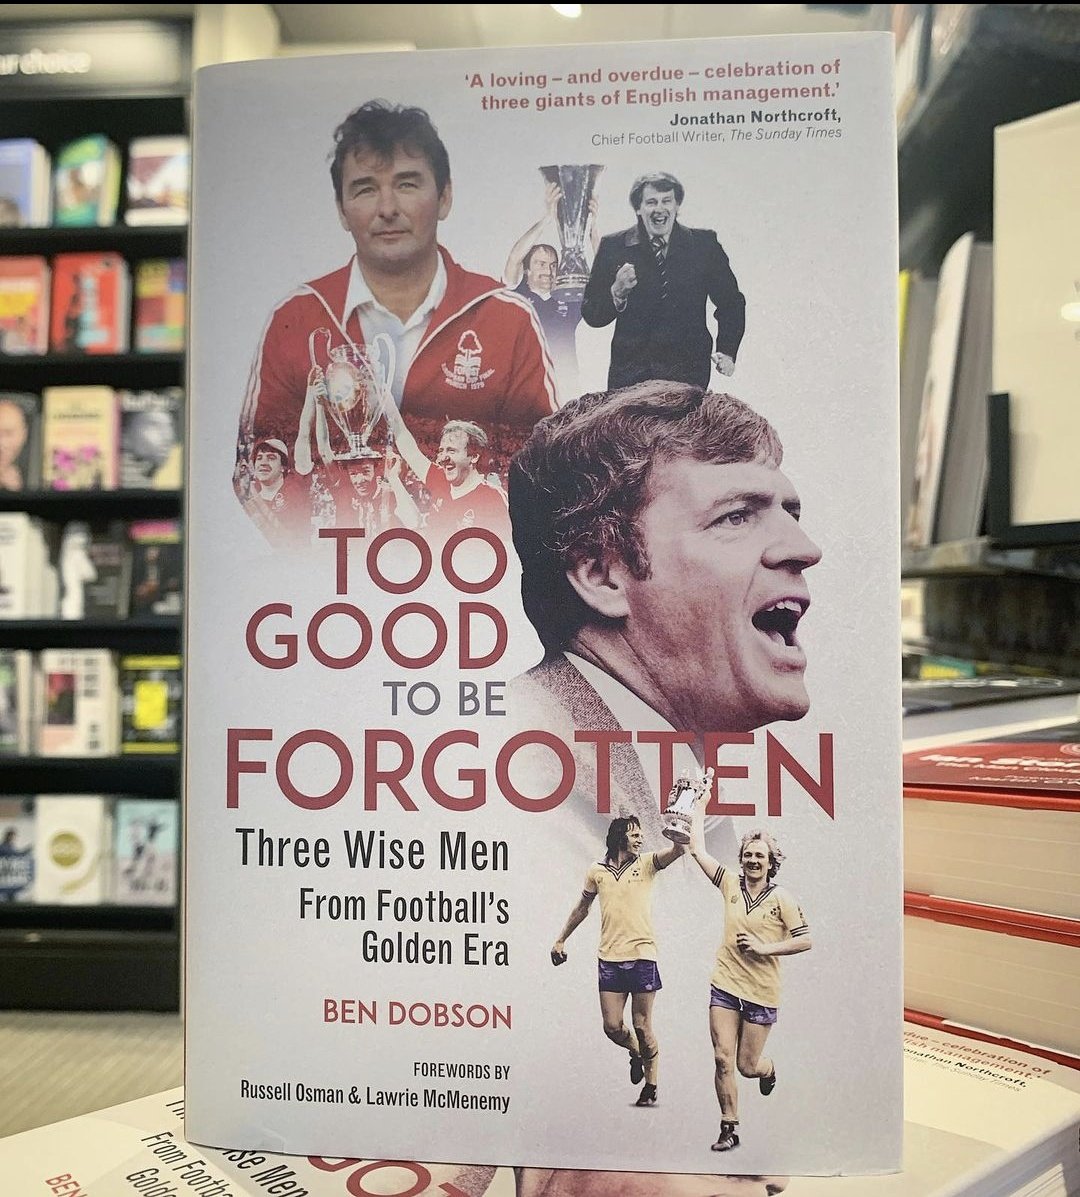 Calling all Nottingham Forest fans!⚽️ Join us for a very special evening with Ben Dobson, author of Too Good to be Forgotten, and Nottingham Forest legends, Viv Anderson and Tony Woodcock! 🕰️Friday 26th April, 5pm Book tickets: waterstones.com/events/ben-dob… #nottinghamforest